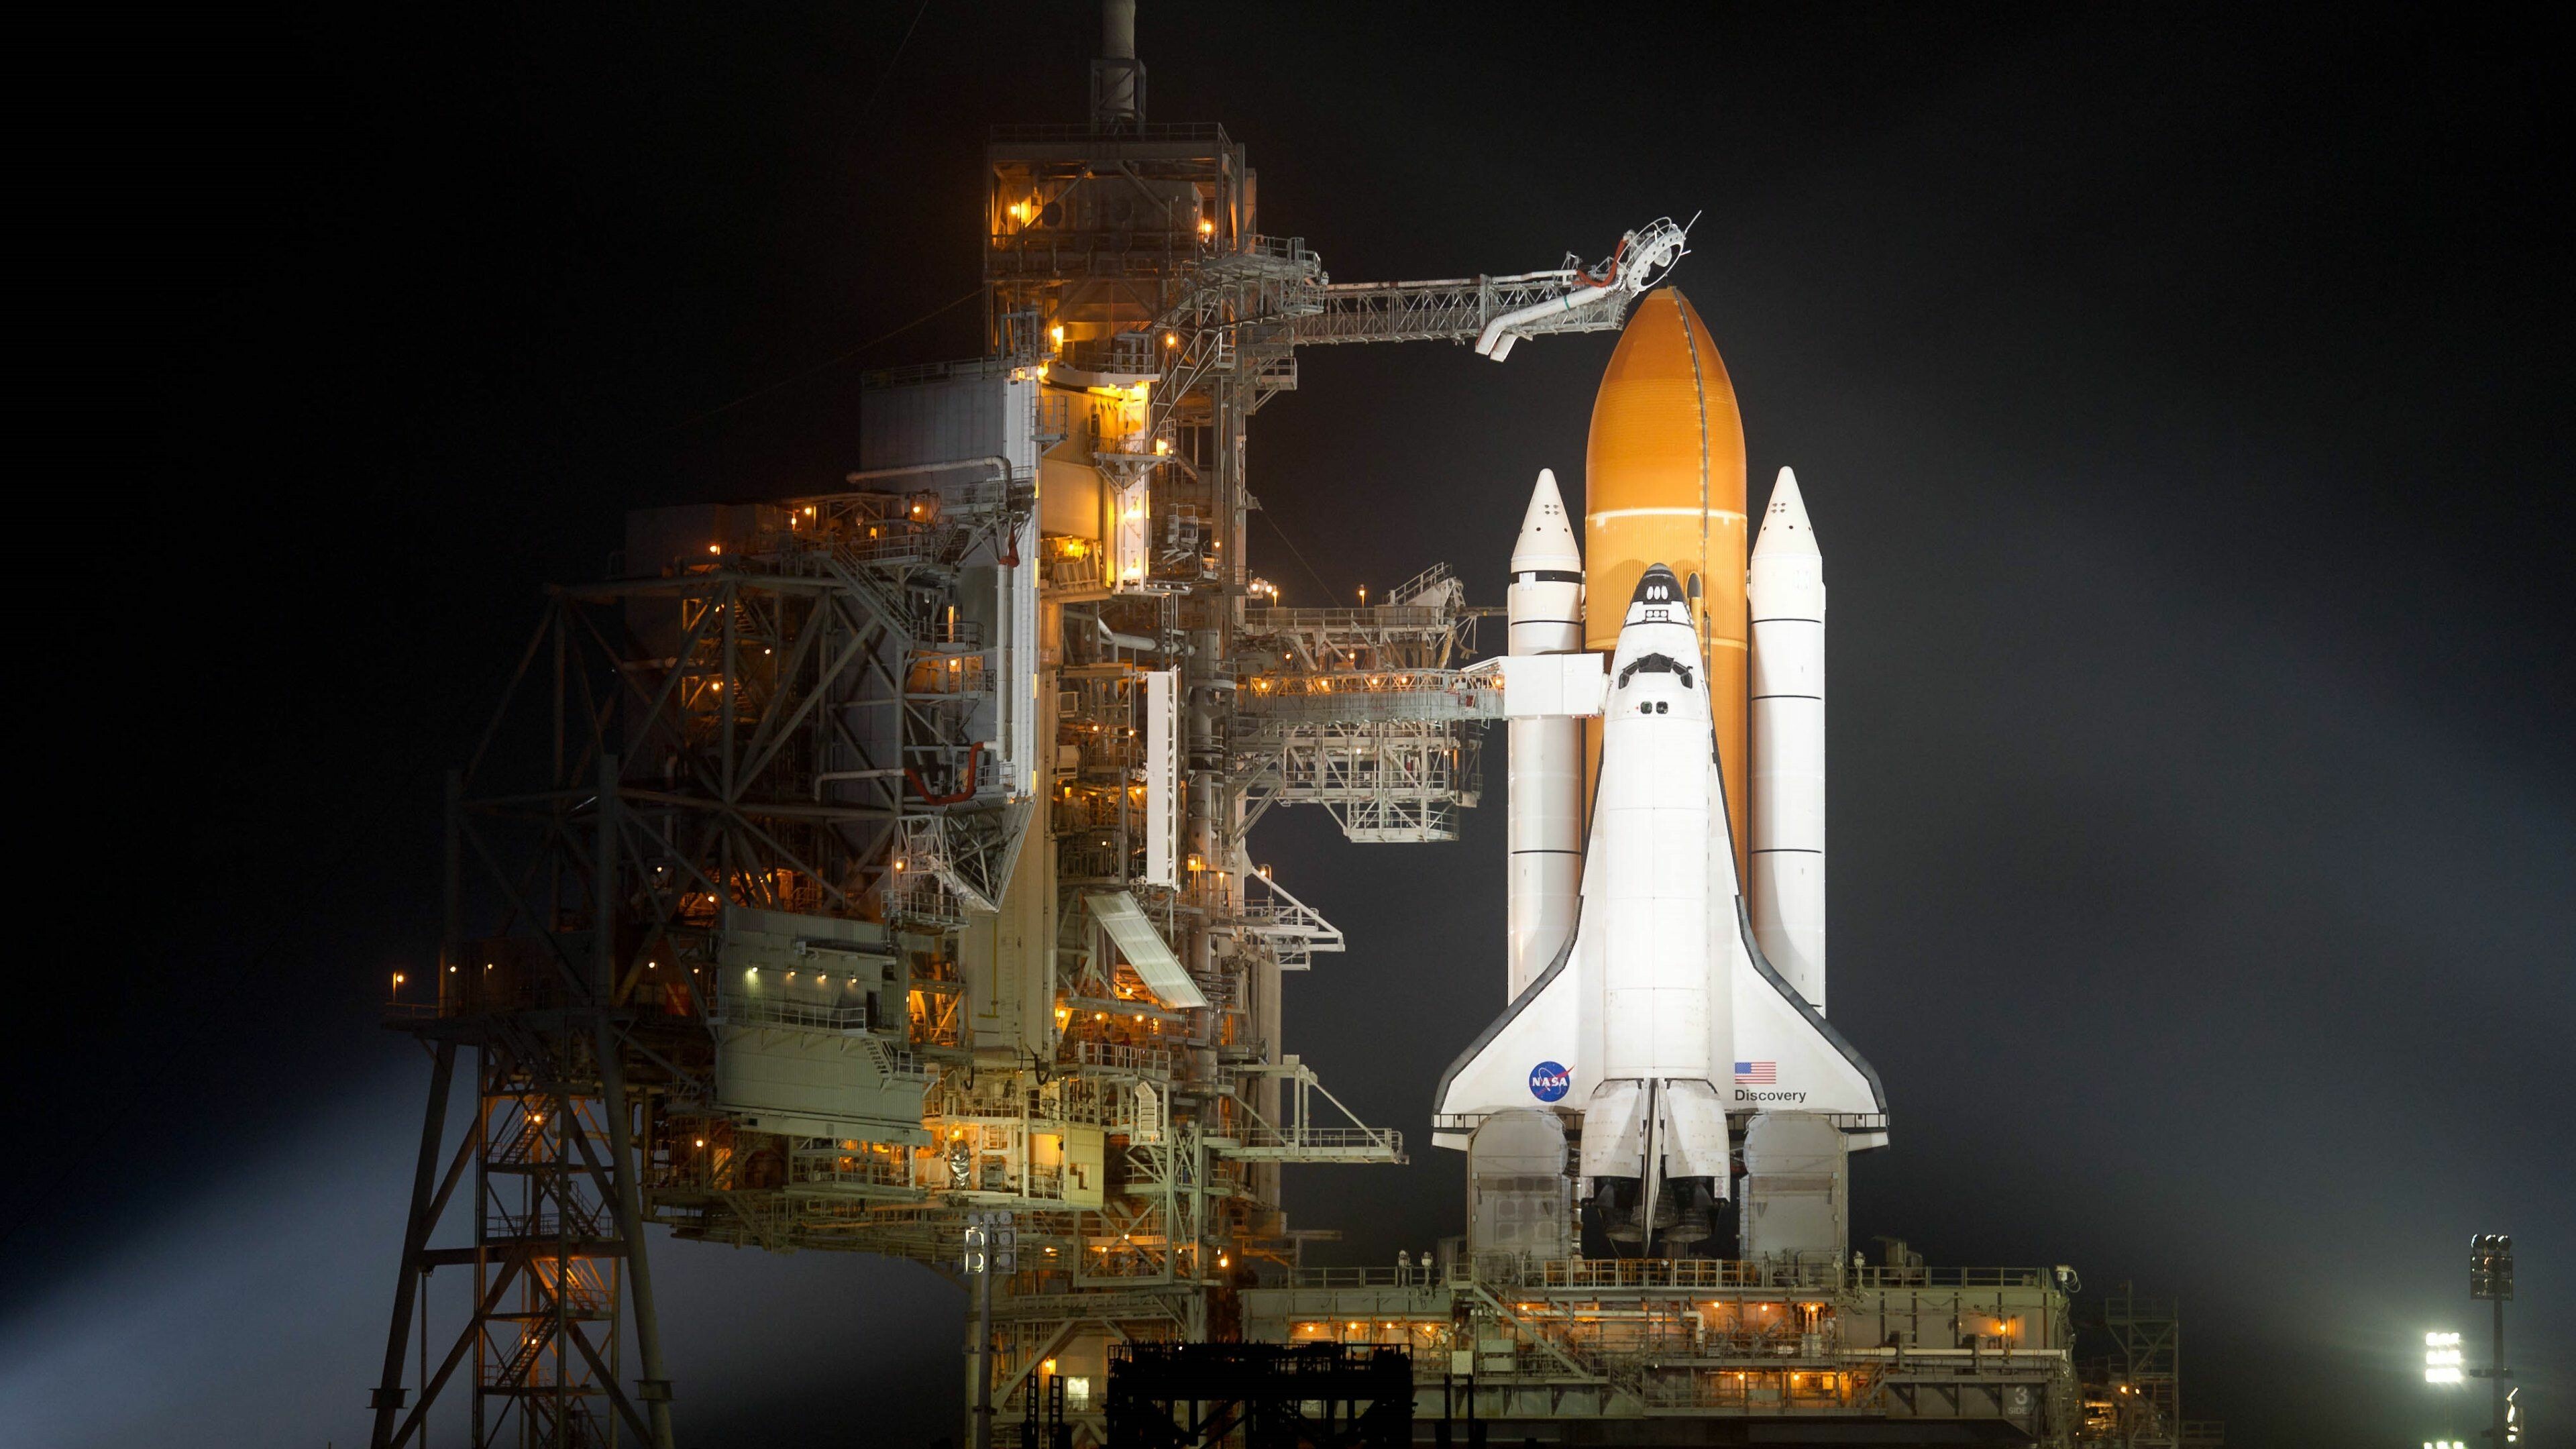 Space Shuttle: Discovery, U.S. National Aeronautics and Space Administration. 3840x2160 4K Wallpaper.